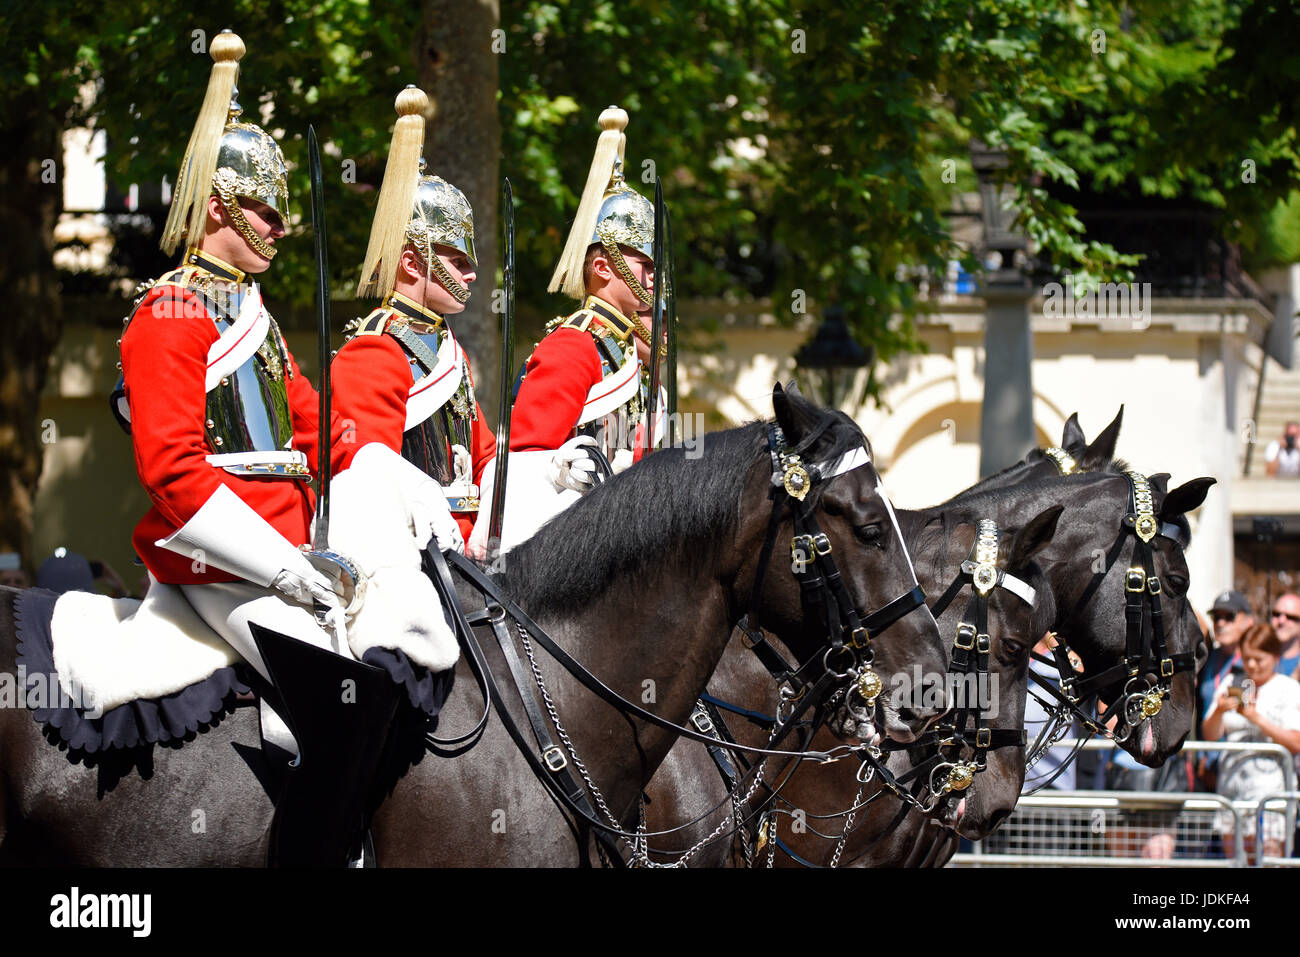 Winners of the Princess Elizabeth Cup, Life Guards of the Household Cavalry at Trooping the Colour 2017 in The Mall, London, UK Stock Photo